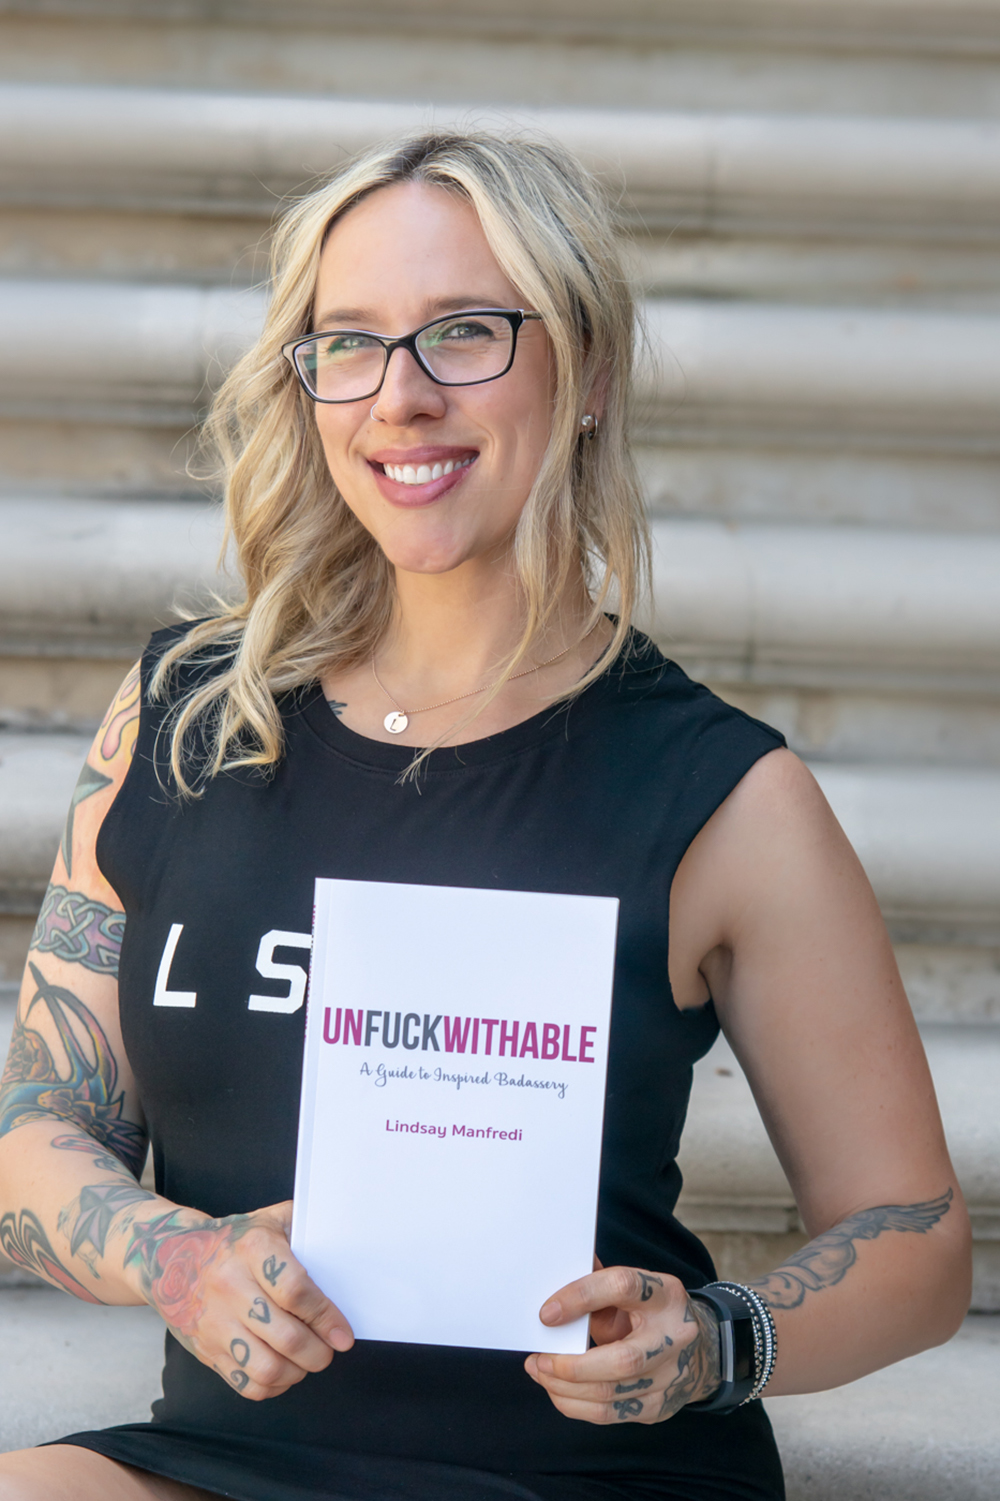 Lindsay Manfredi - "Unfuckwithable: A Guide to Inspired Badassery"